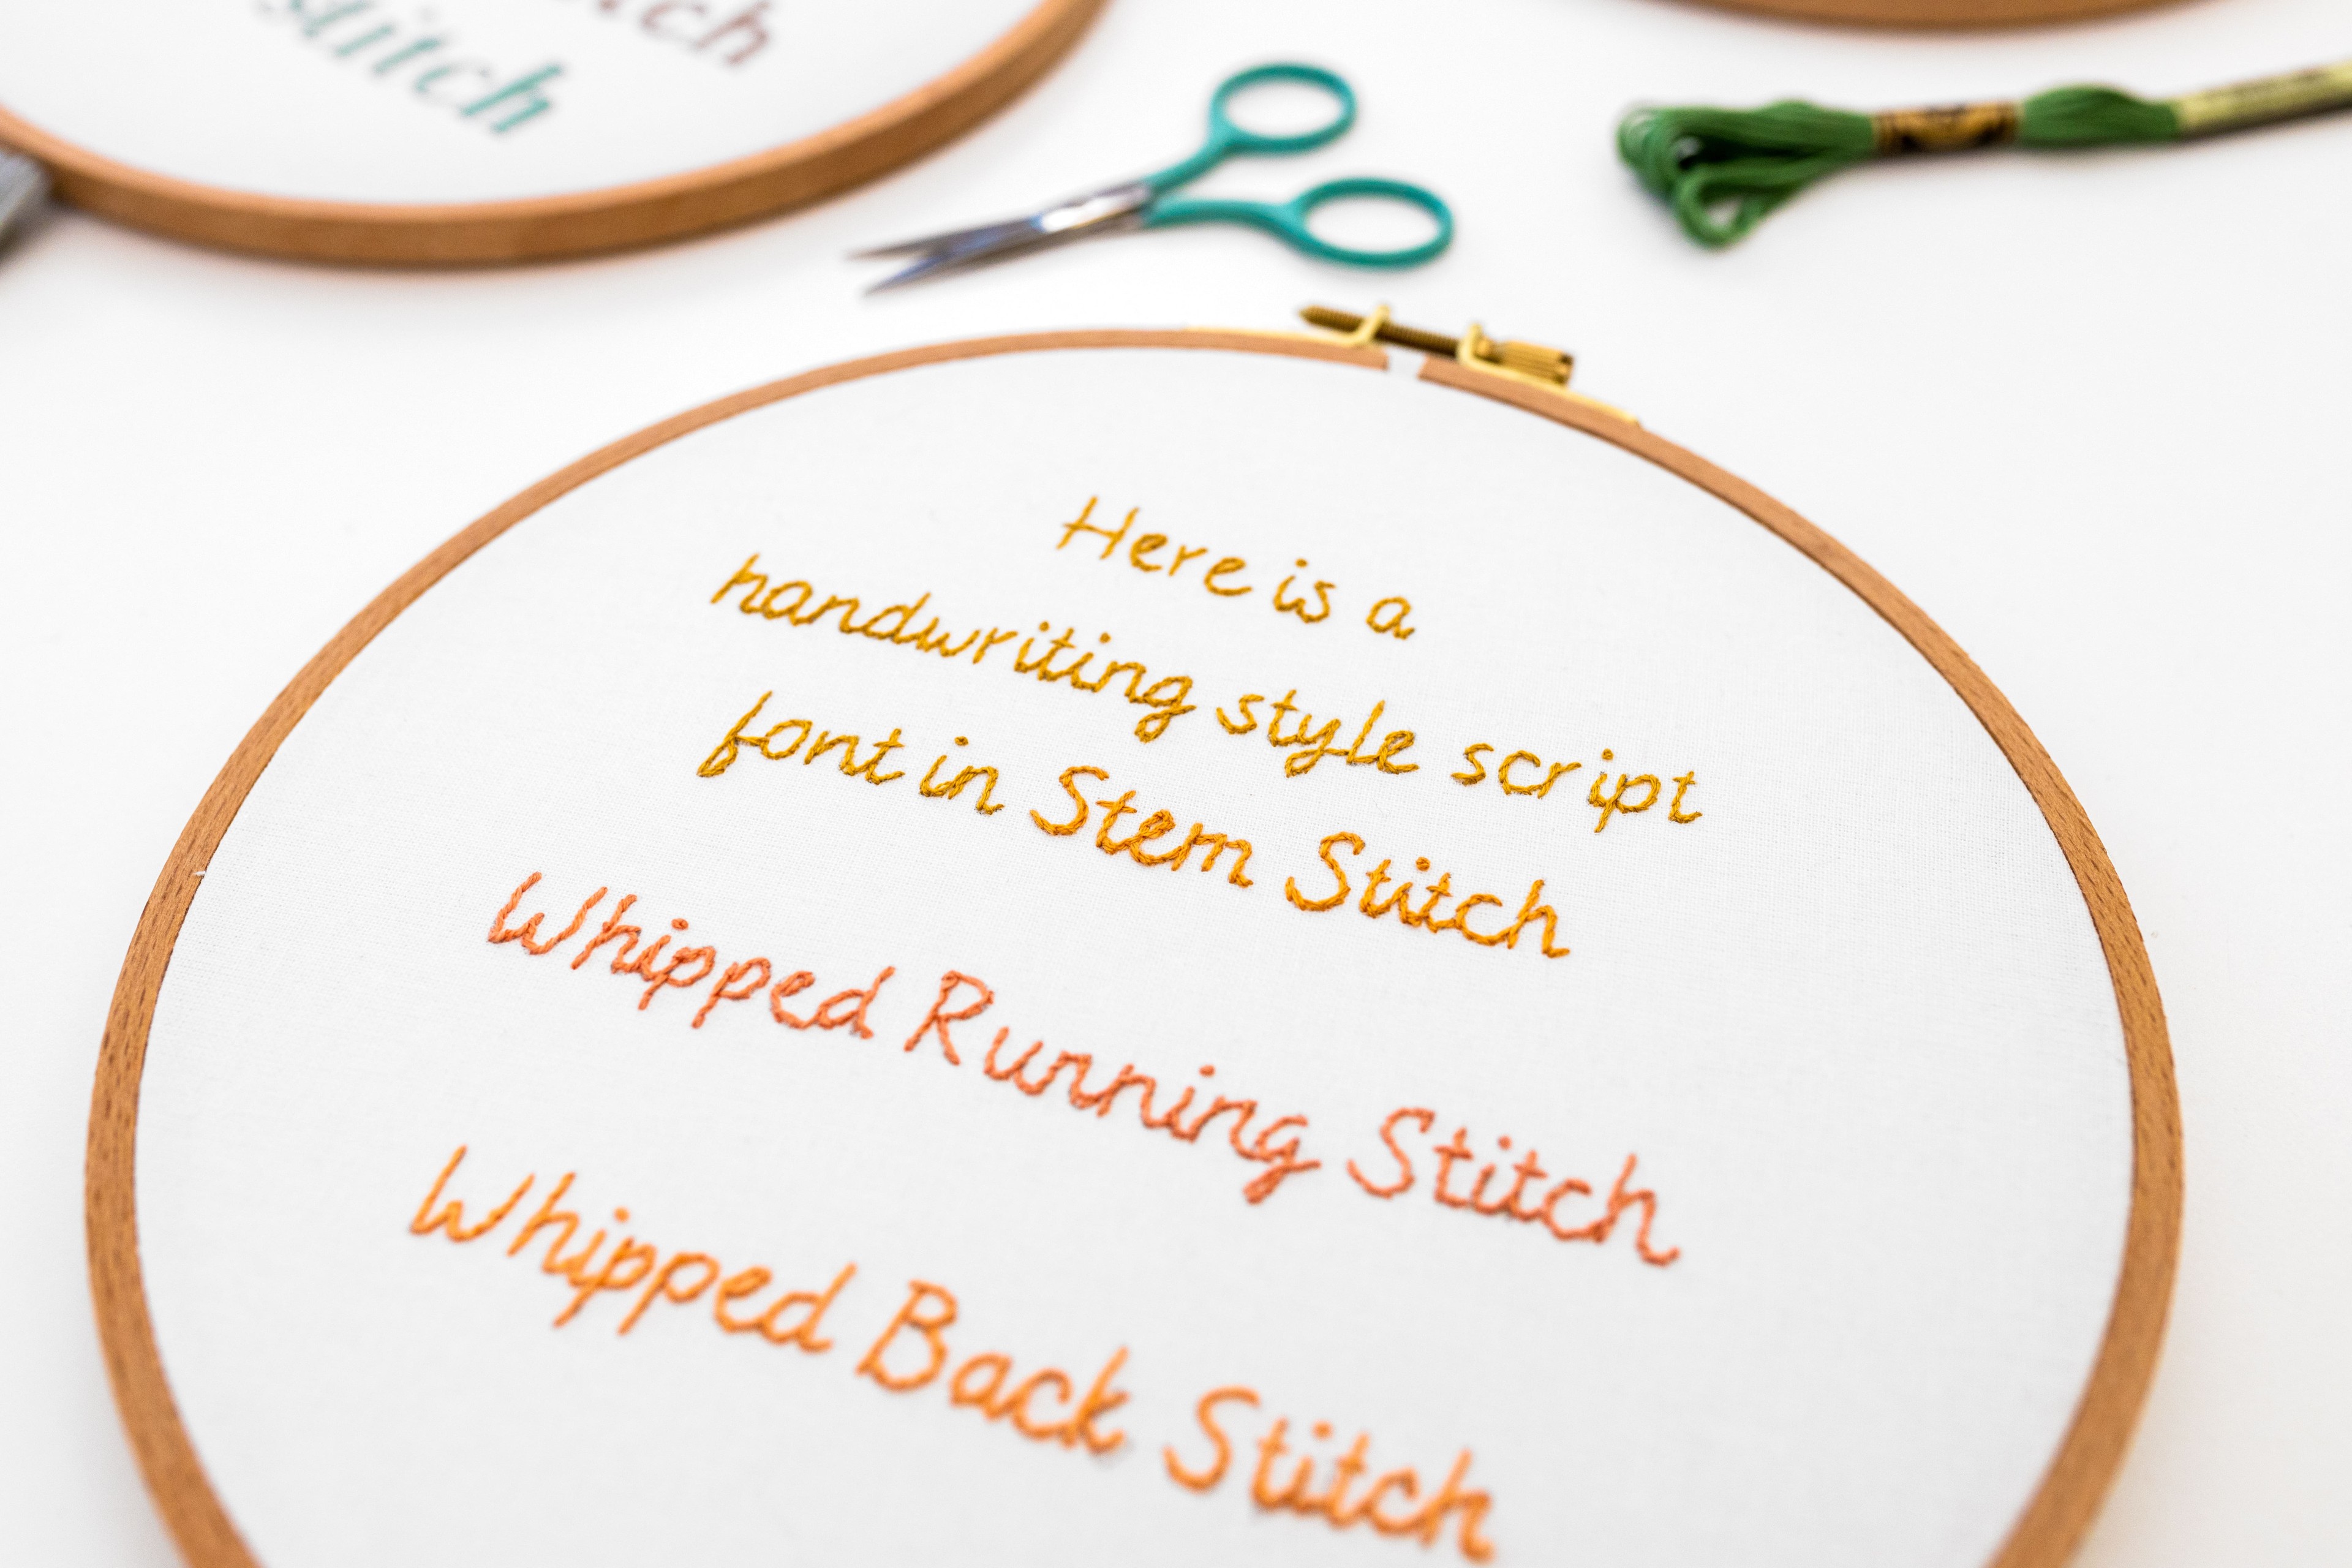 This is an image of different handwritten stitches and writing on modern embroidery hoops.